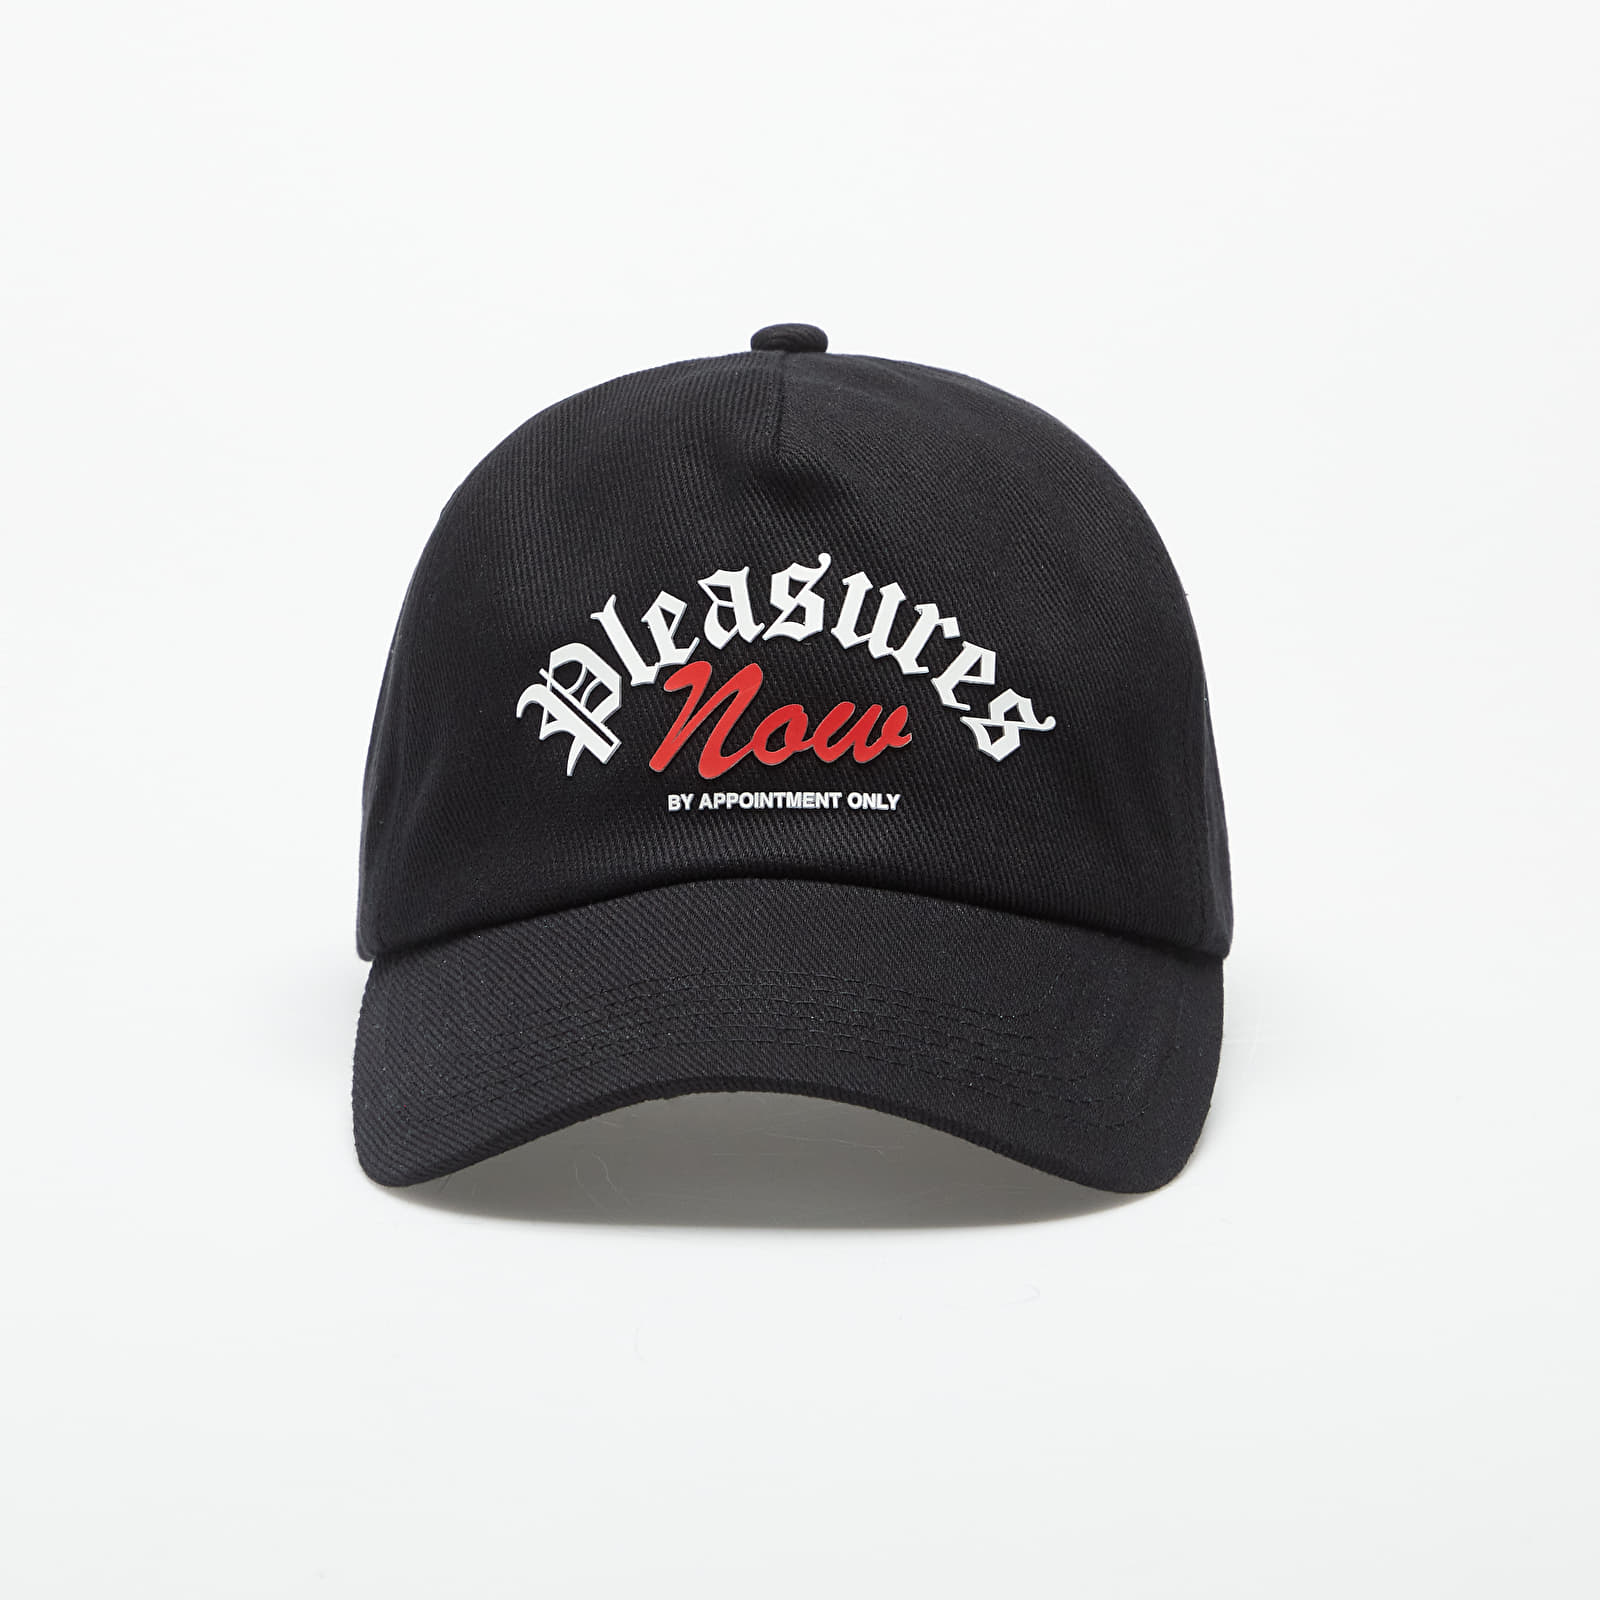 PLEASURES - appointment unconstructed snapback black